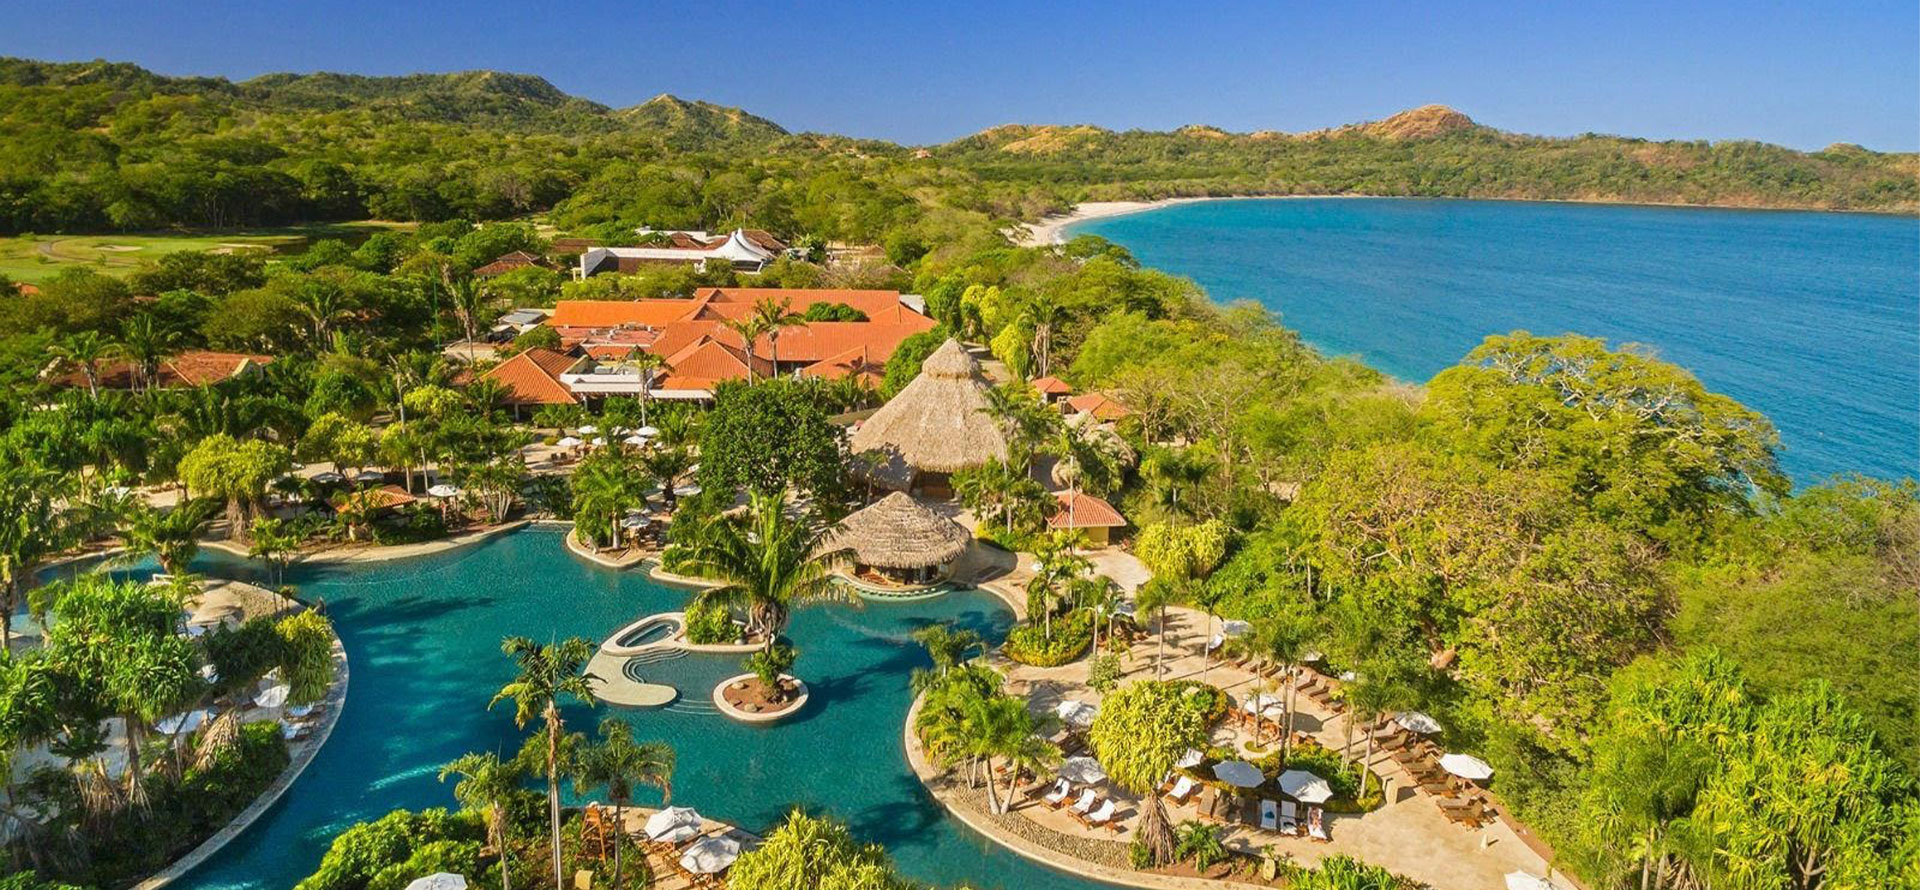 Costa rica all-inclusive adults only resort swimming pool and palmtree.